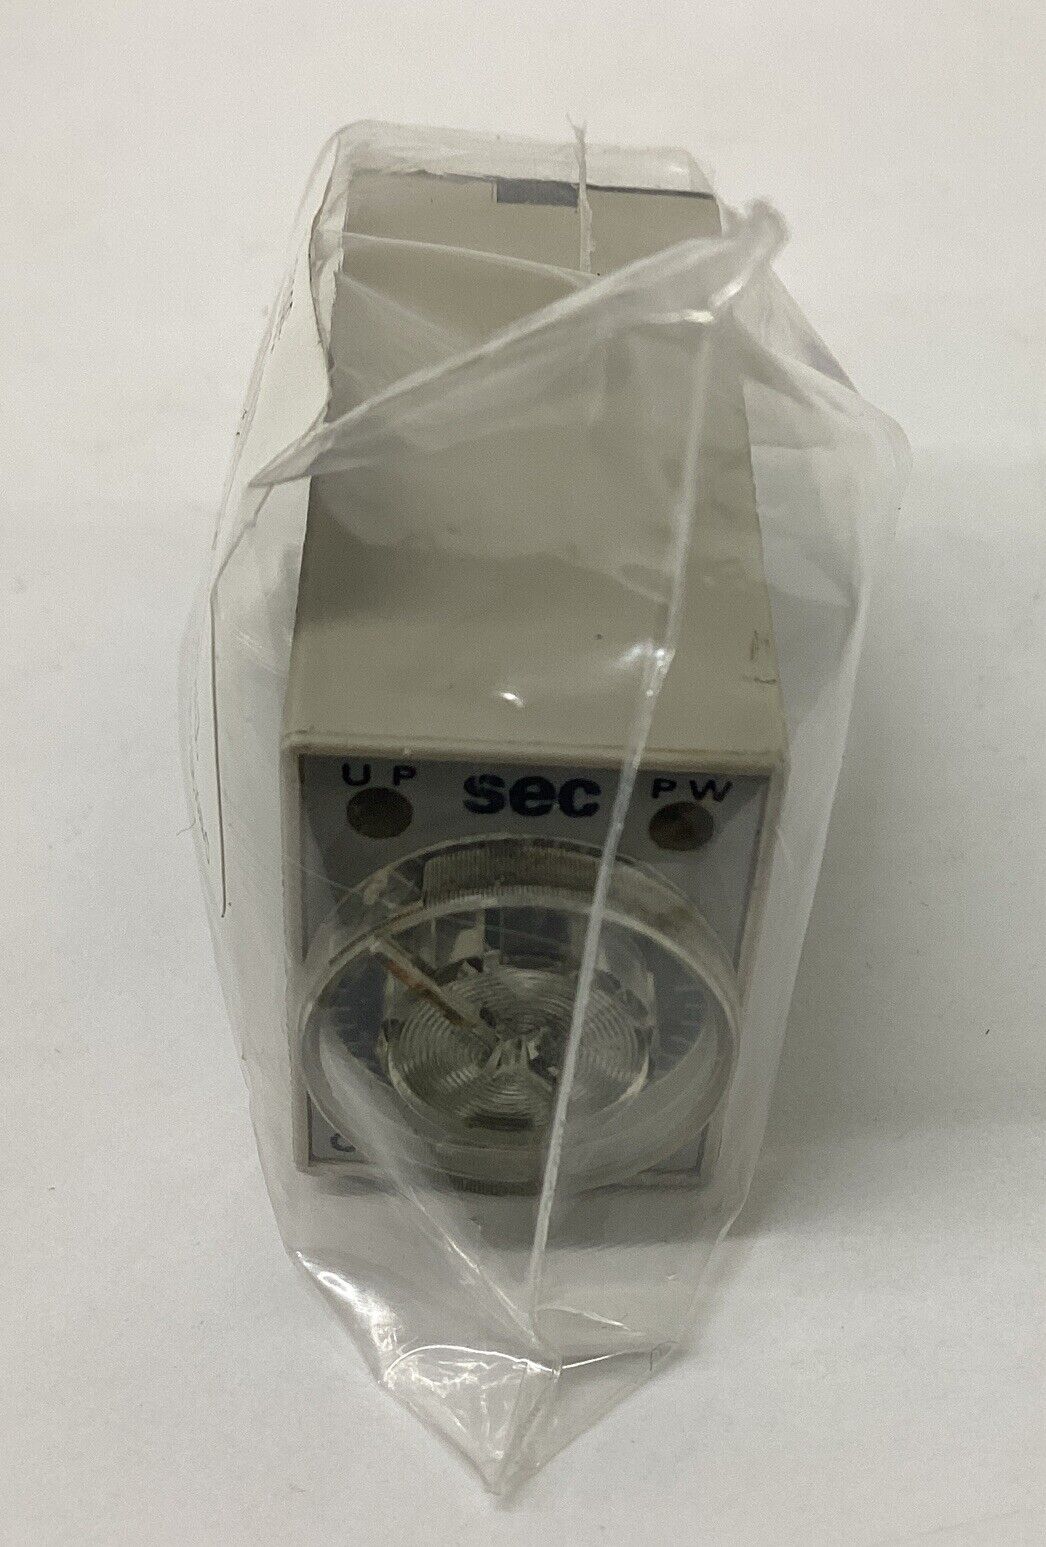 Omron H3Y-2  0-60 Seconds Timer Relay AC100-120V (GR140) - 0